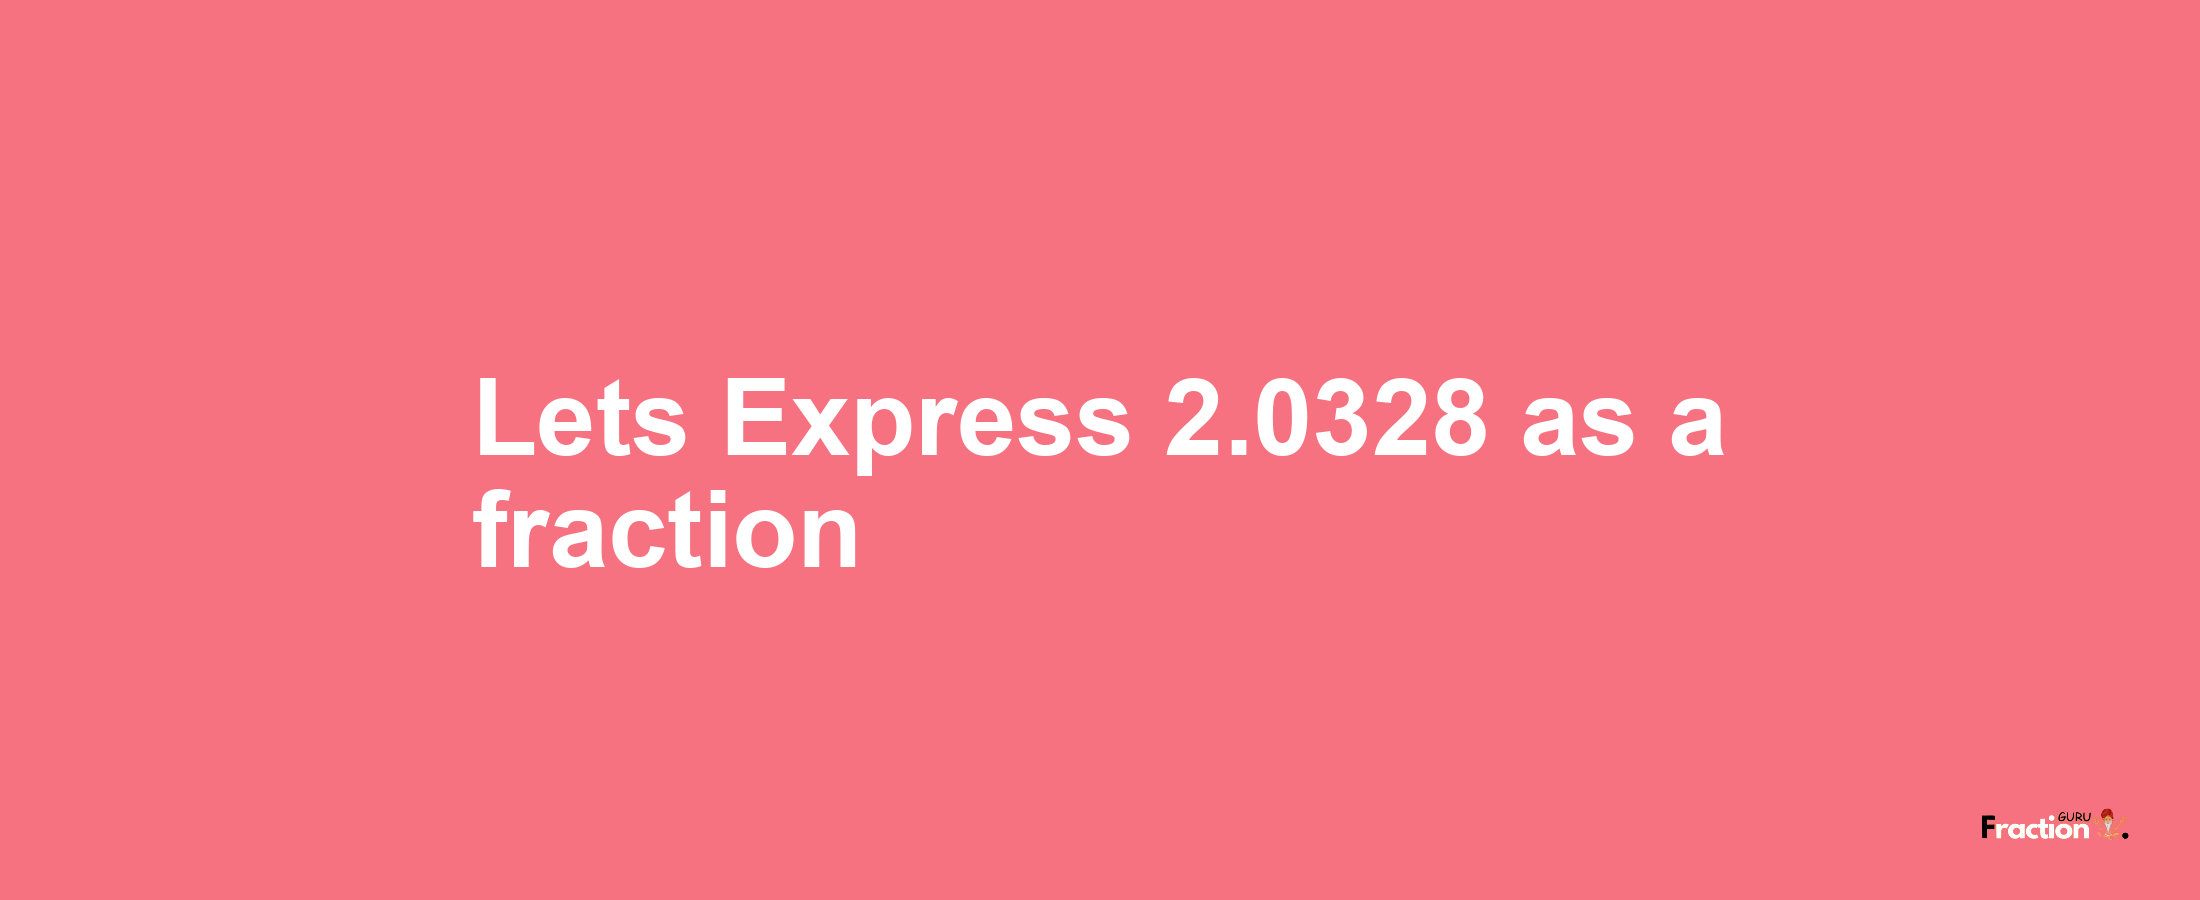 Lets Express 2.0328 as afraction